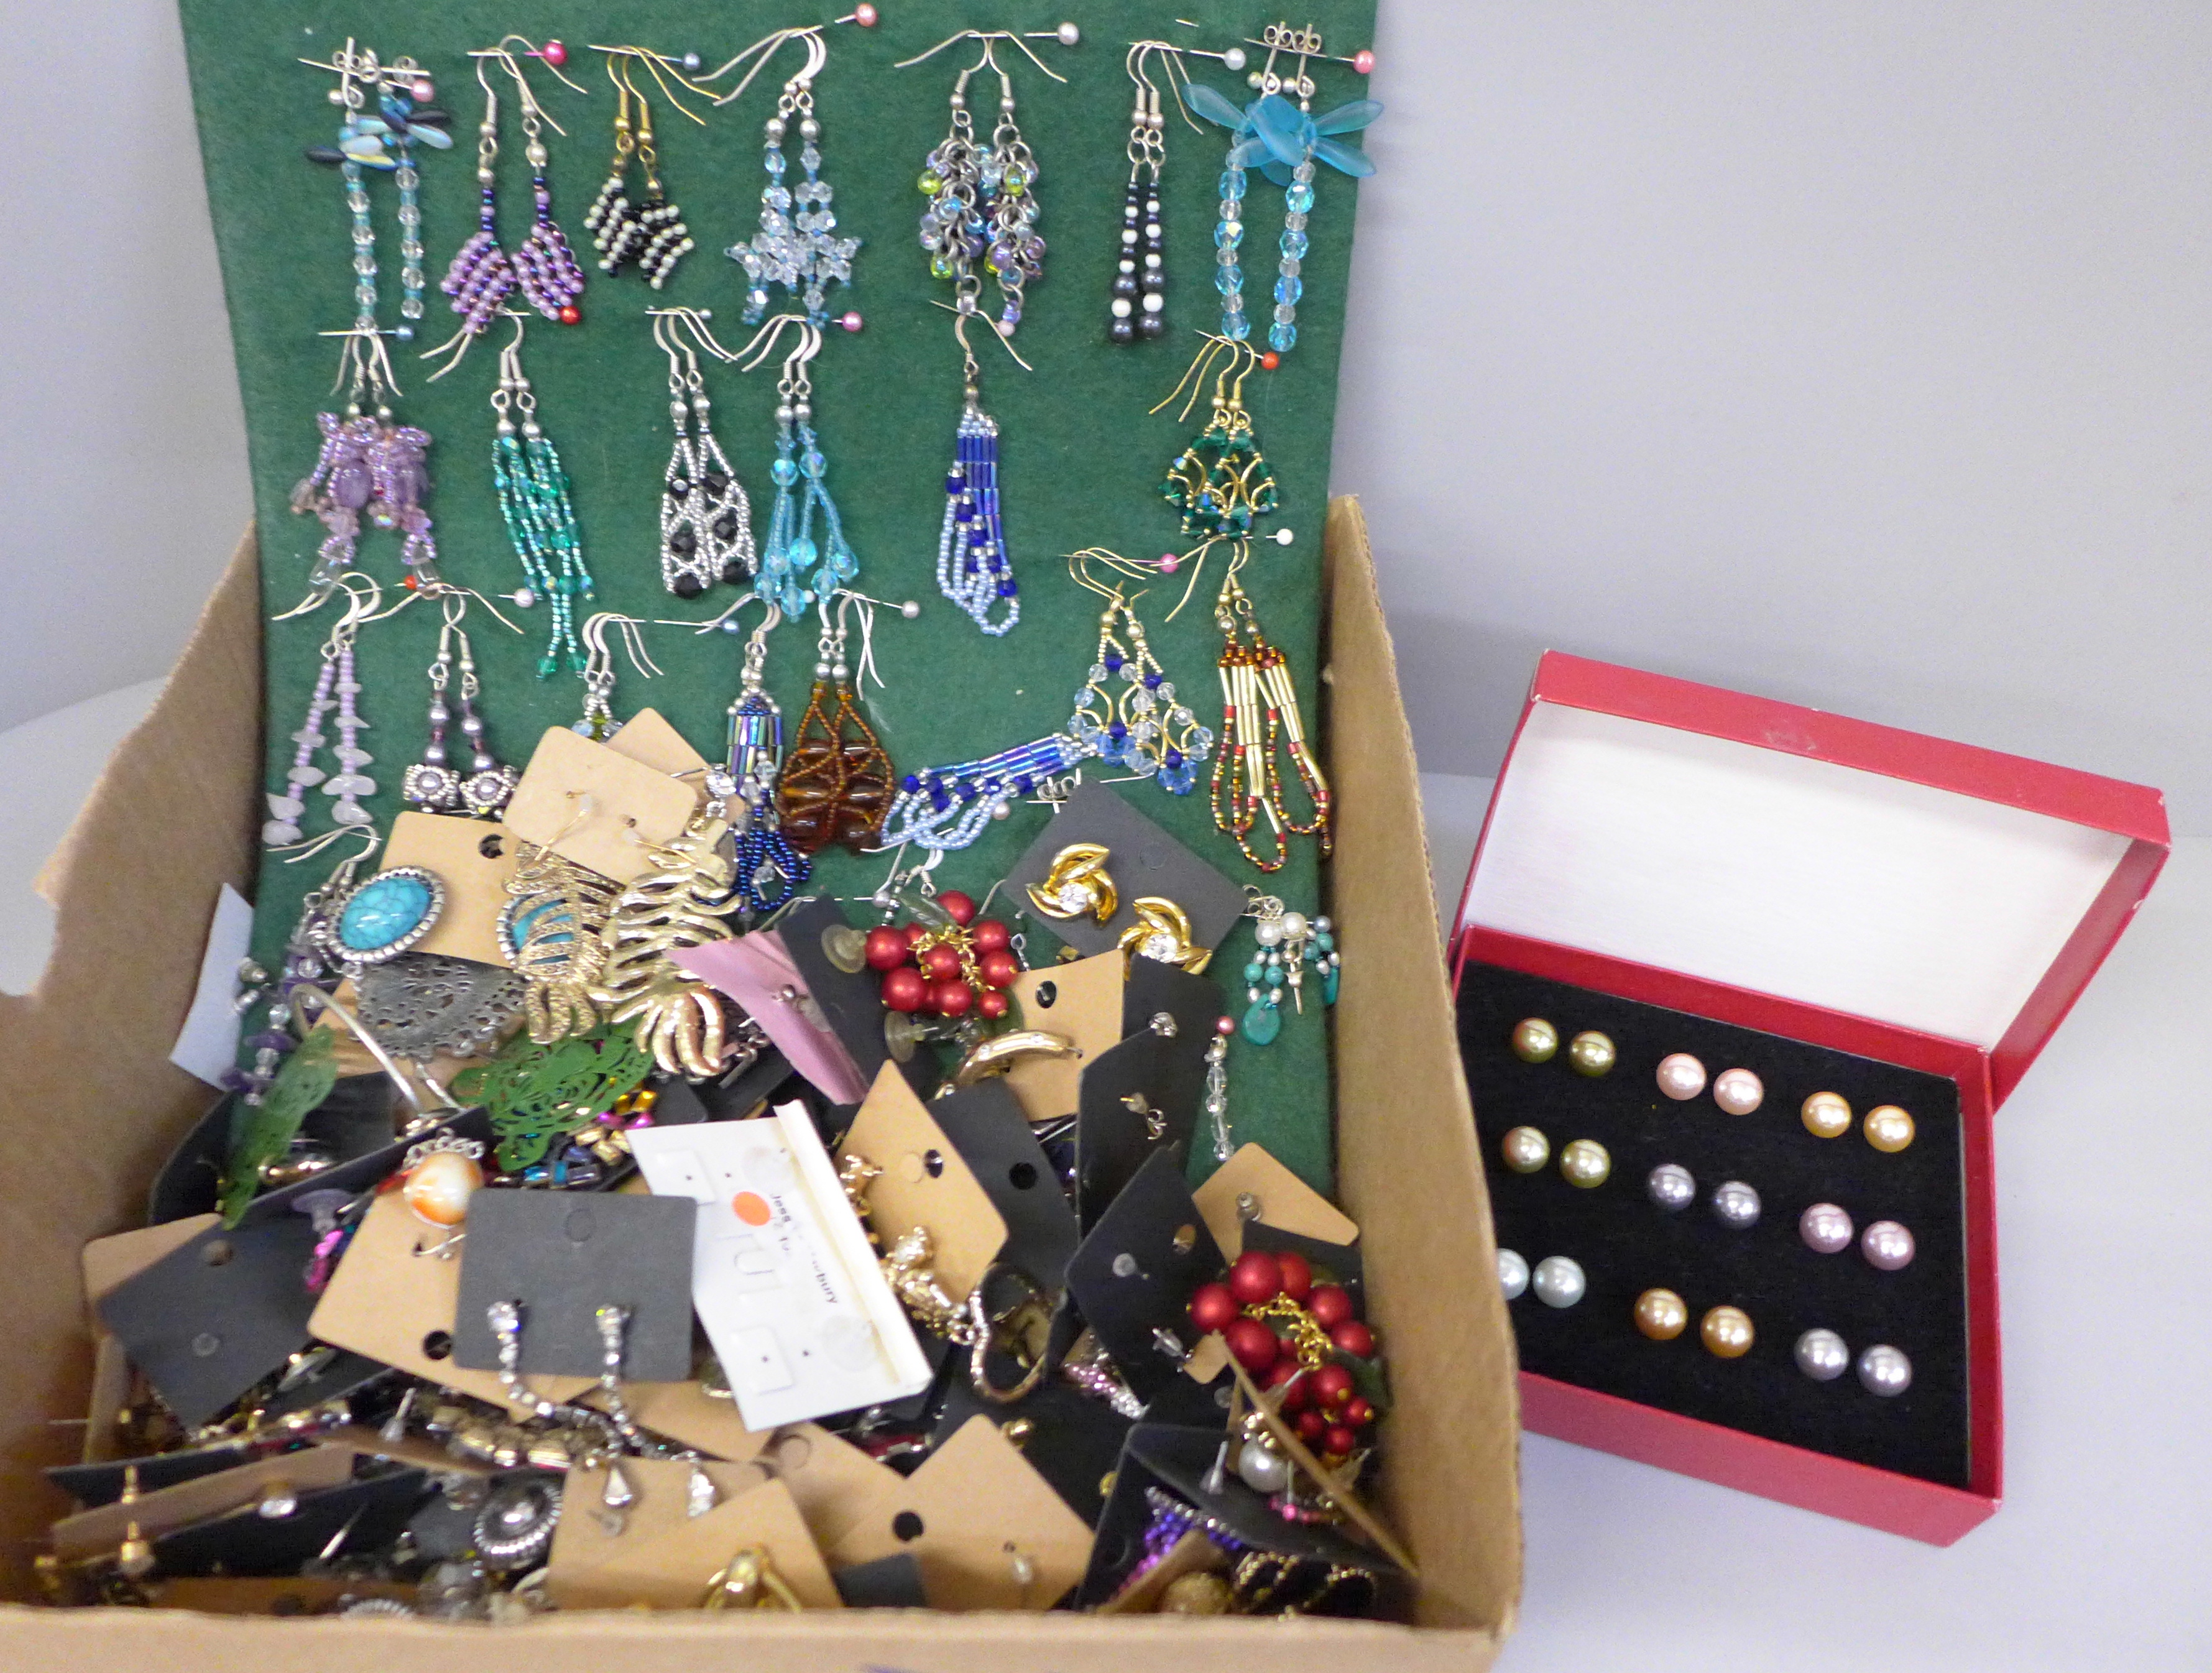 A large quantity of vintage and modern earrings